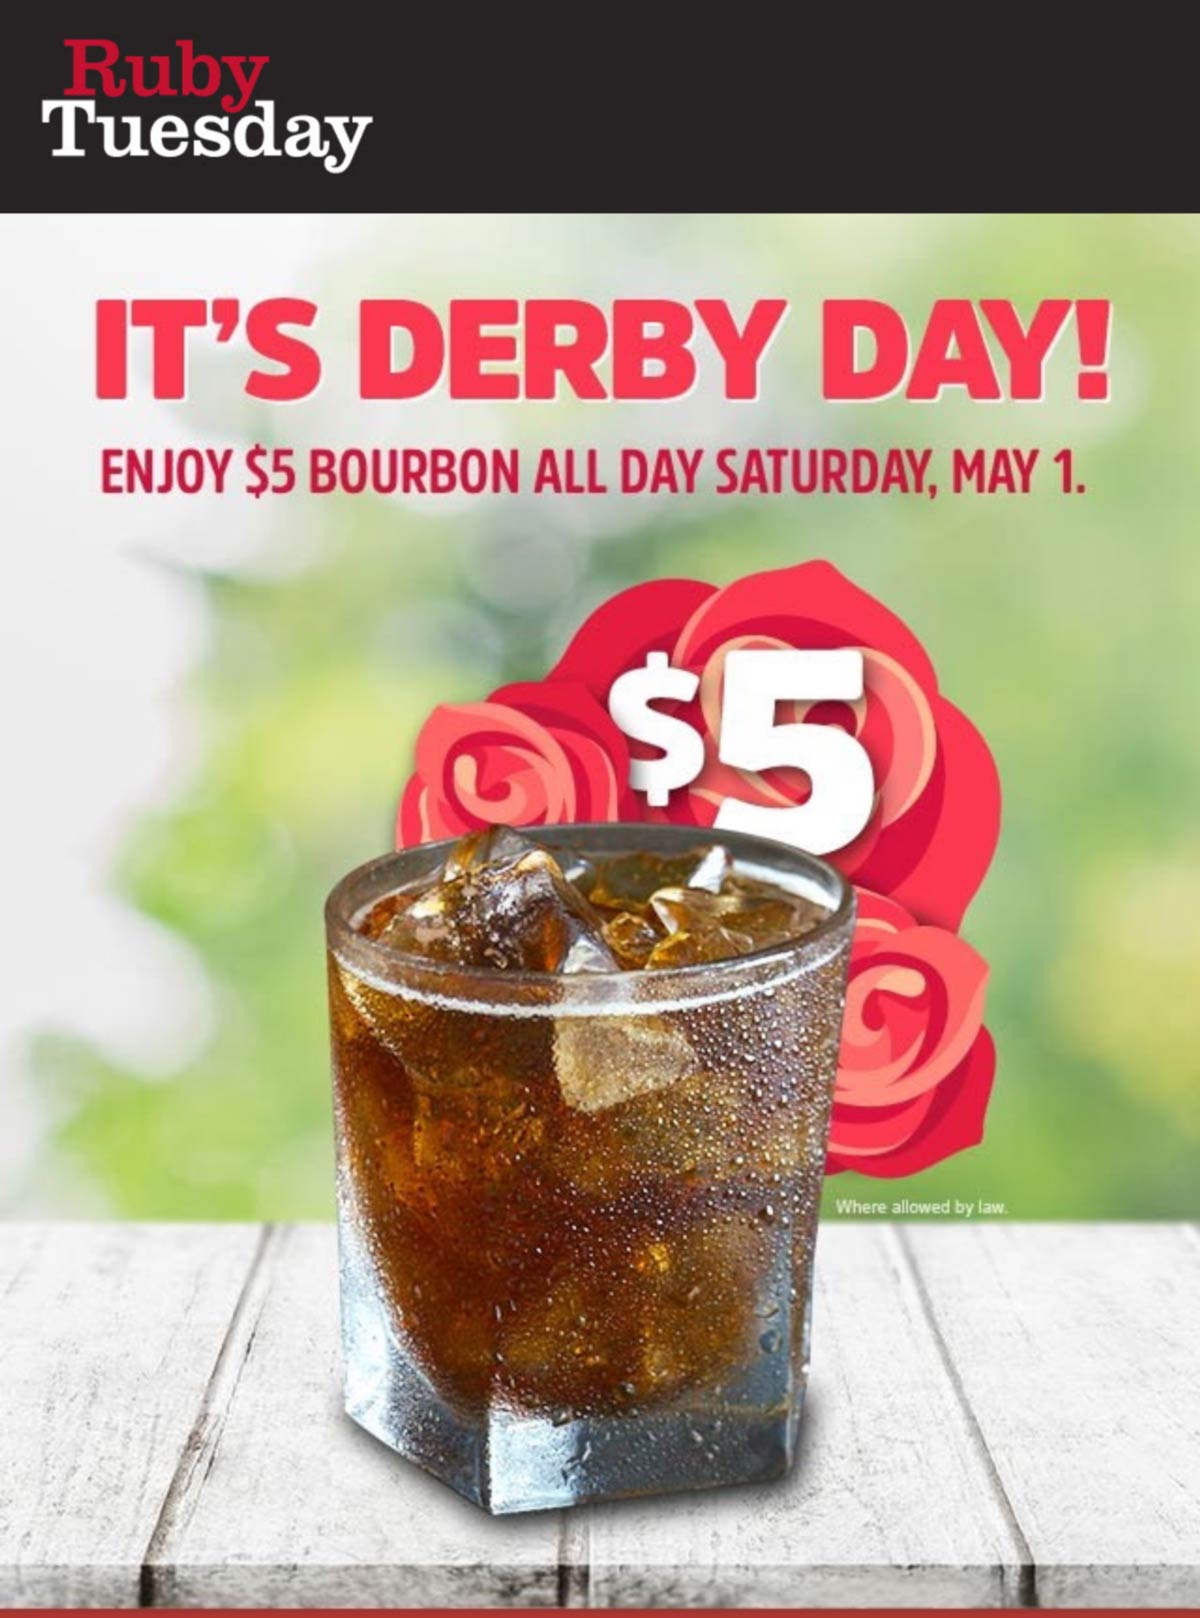 Ruby Tuesday restaurants Coupon  $5 bourbon today at Ruby Tuesday restaurants #rubytuesday 